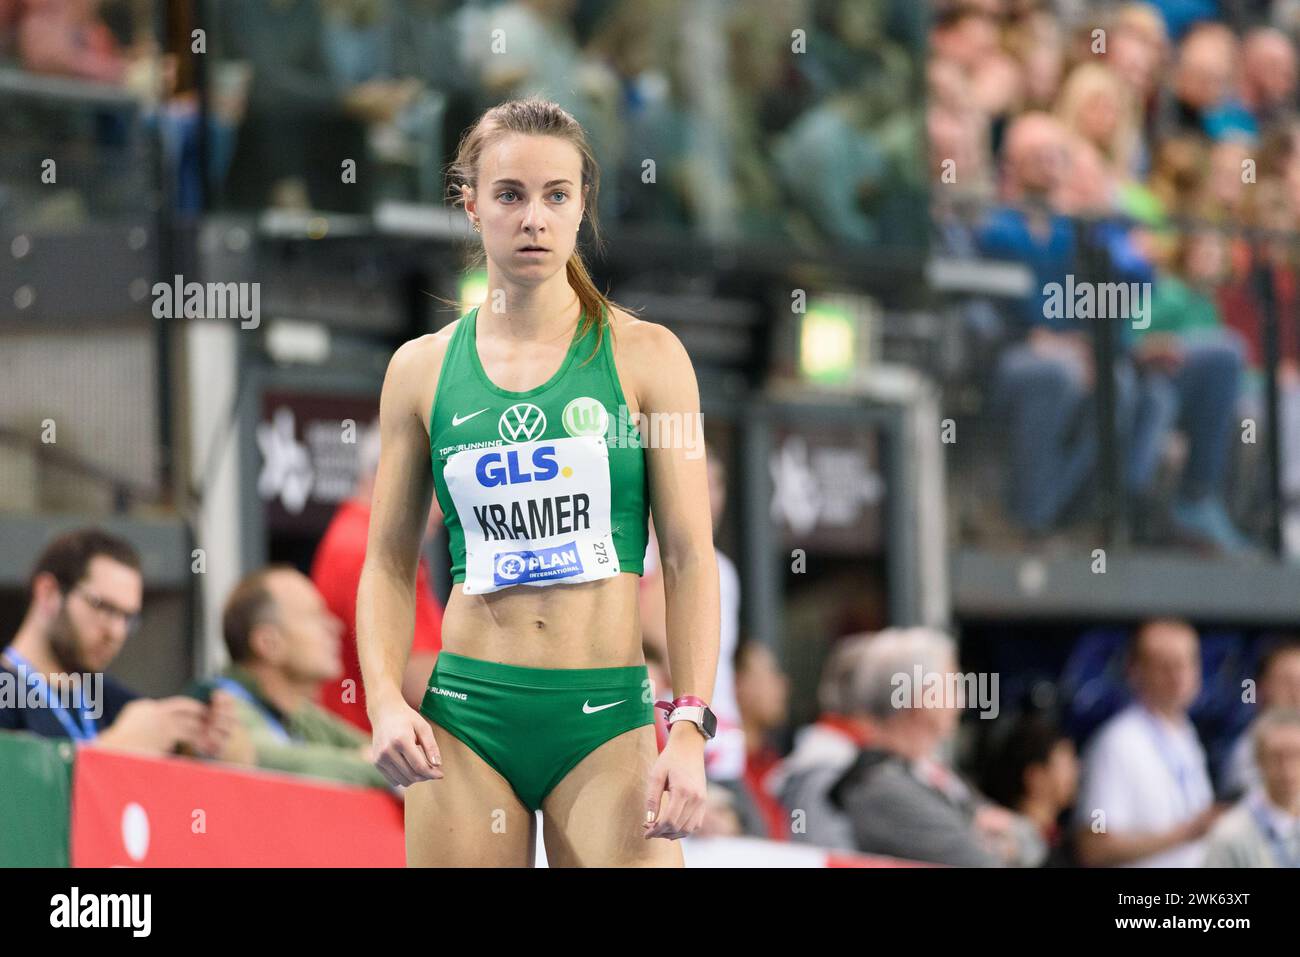 Leipzig, Germany. 18th Feb, 2024. Leipzig, Germany, February 18th 2024: Pernilla Kramer (VfL Wolfsburg) before the start of the semi-final over 200 meters at the German Indoor Athletics Championships 2024 in the Quarterback Immobilien Arena, Leipzig (Sven Beyrich/SPP) Credit: SPP Sport Press Photo. /Alamy Live News Stock Photo